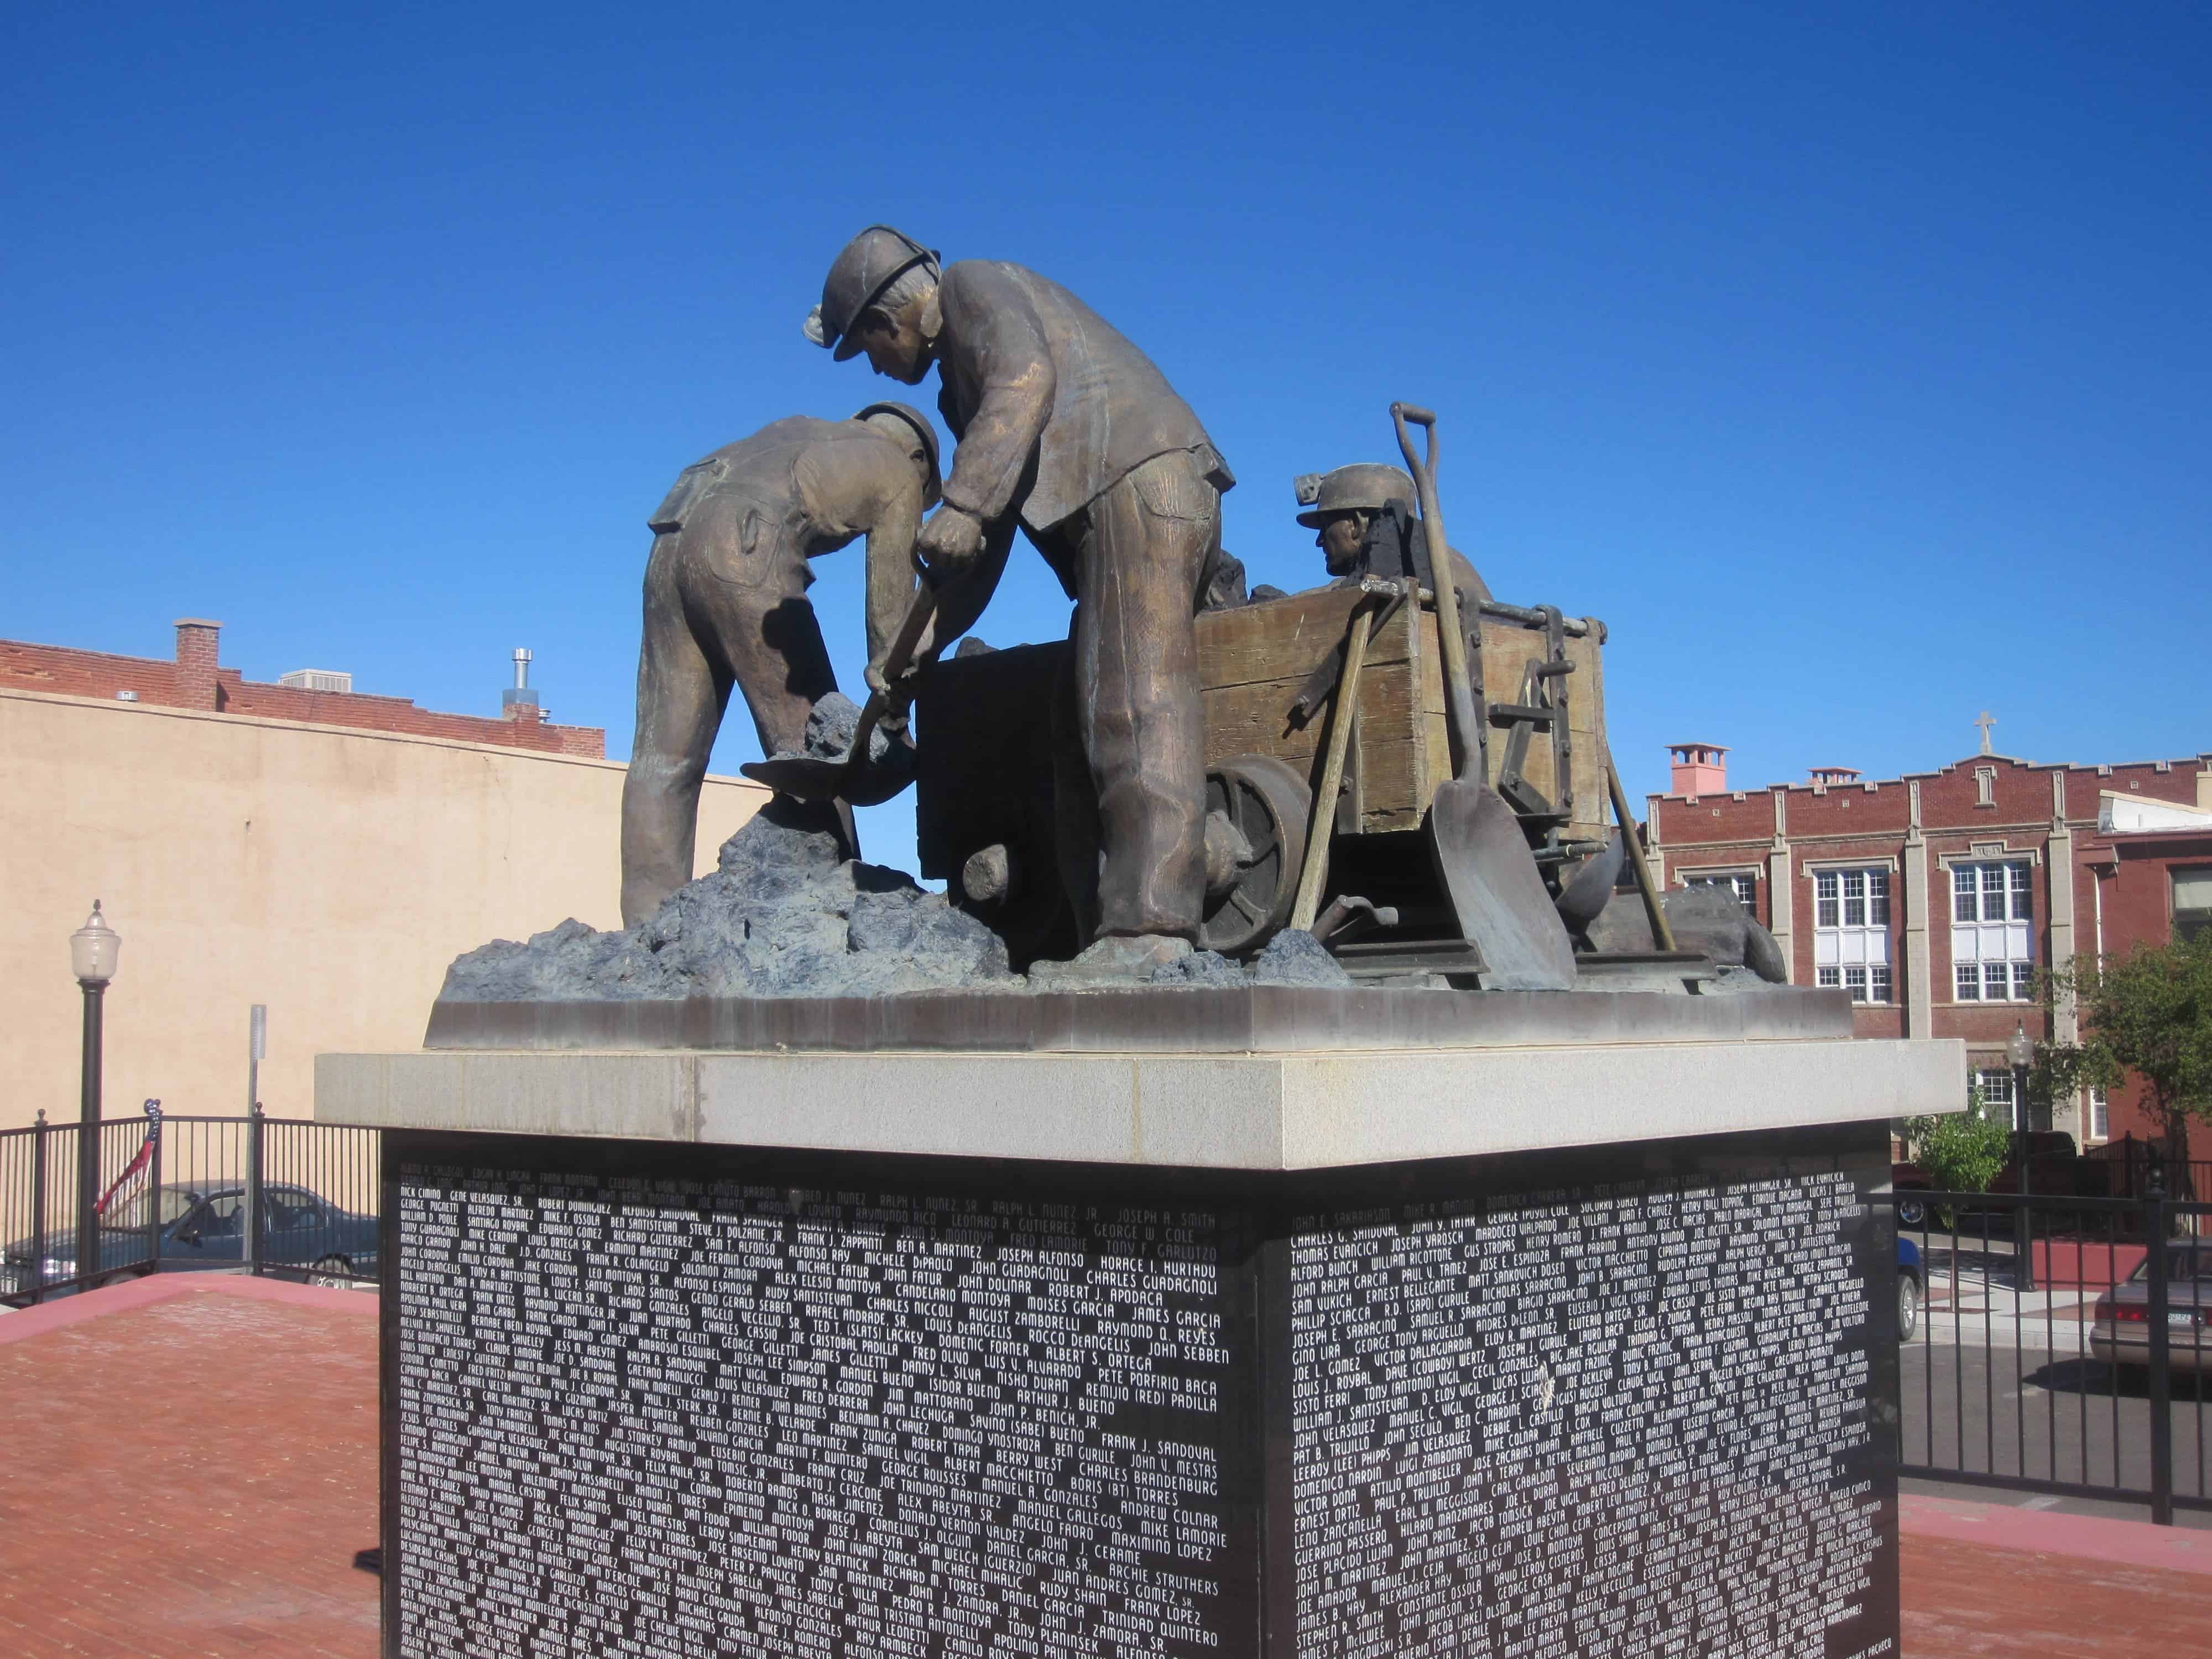 A coal mining monument in Colorado. Credit: Wikimedia Commons